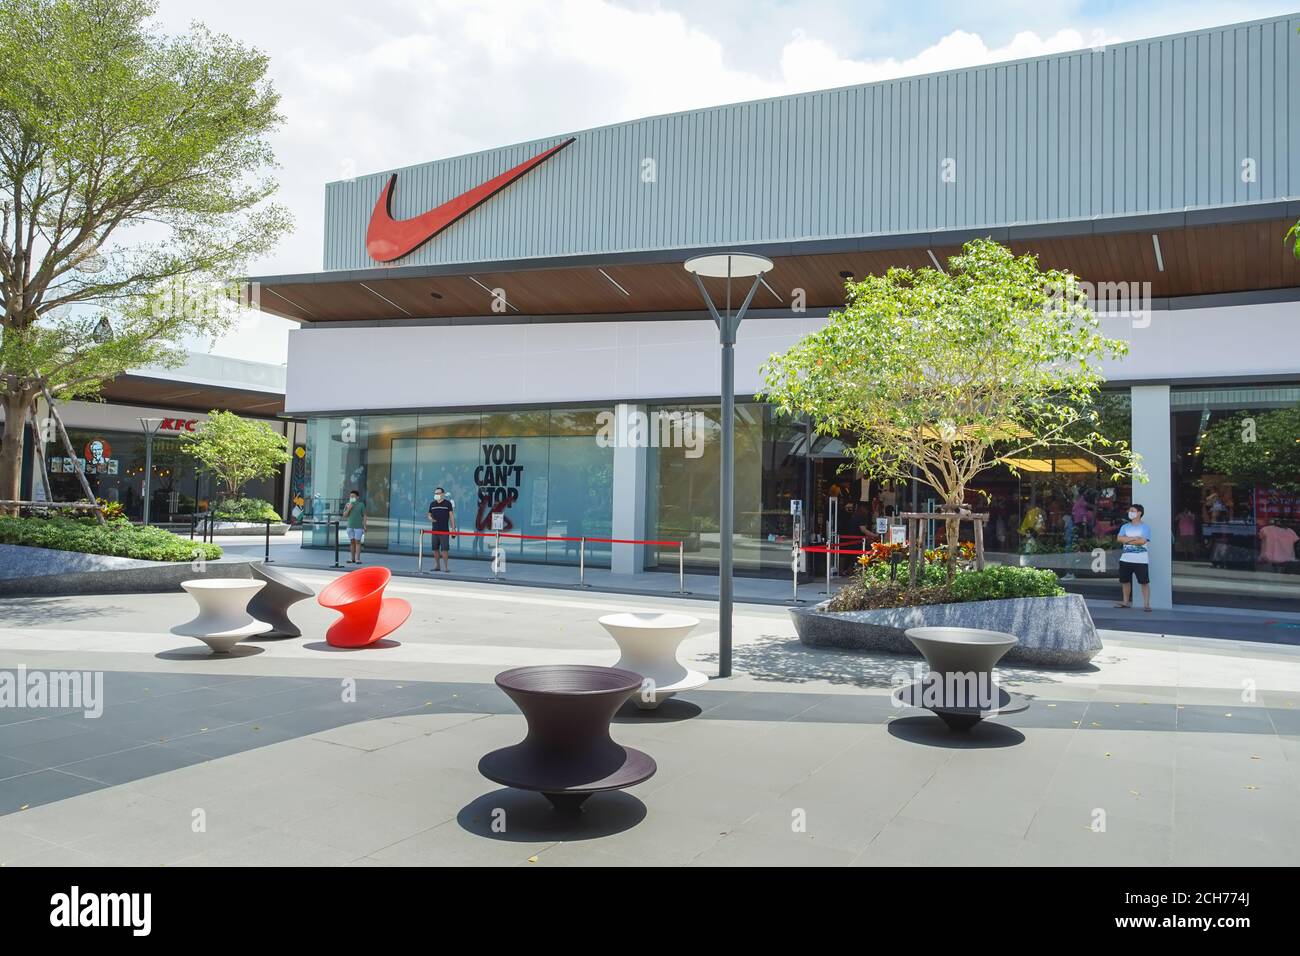 verontreiniging Uiterlijk Welsprekend Samut Prakan, Thailand - July 28, 2020: Nike shop in Siam Premium Outlets  Bangkok. Nike is one of the biggest sport manufacturing company in the  world Stock Photo - Alamy